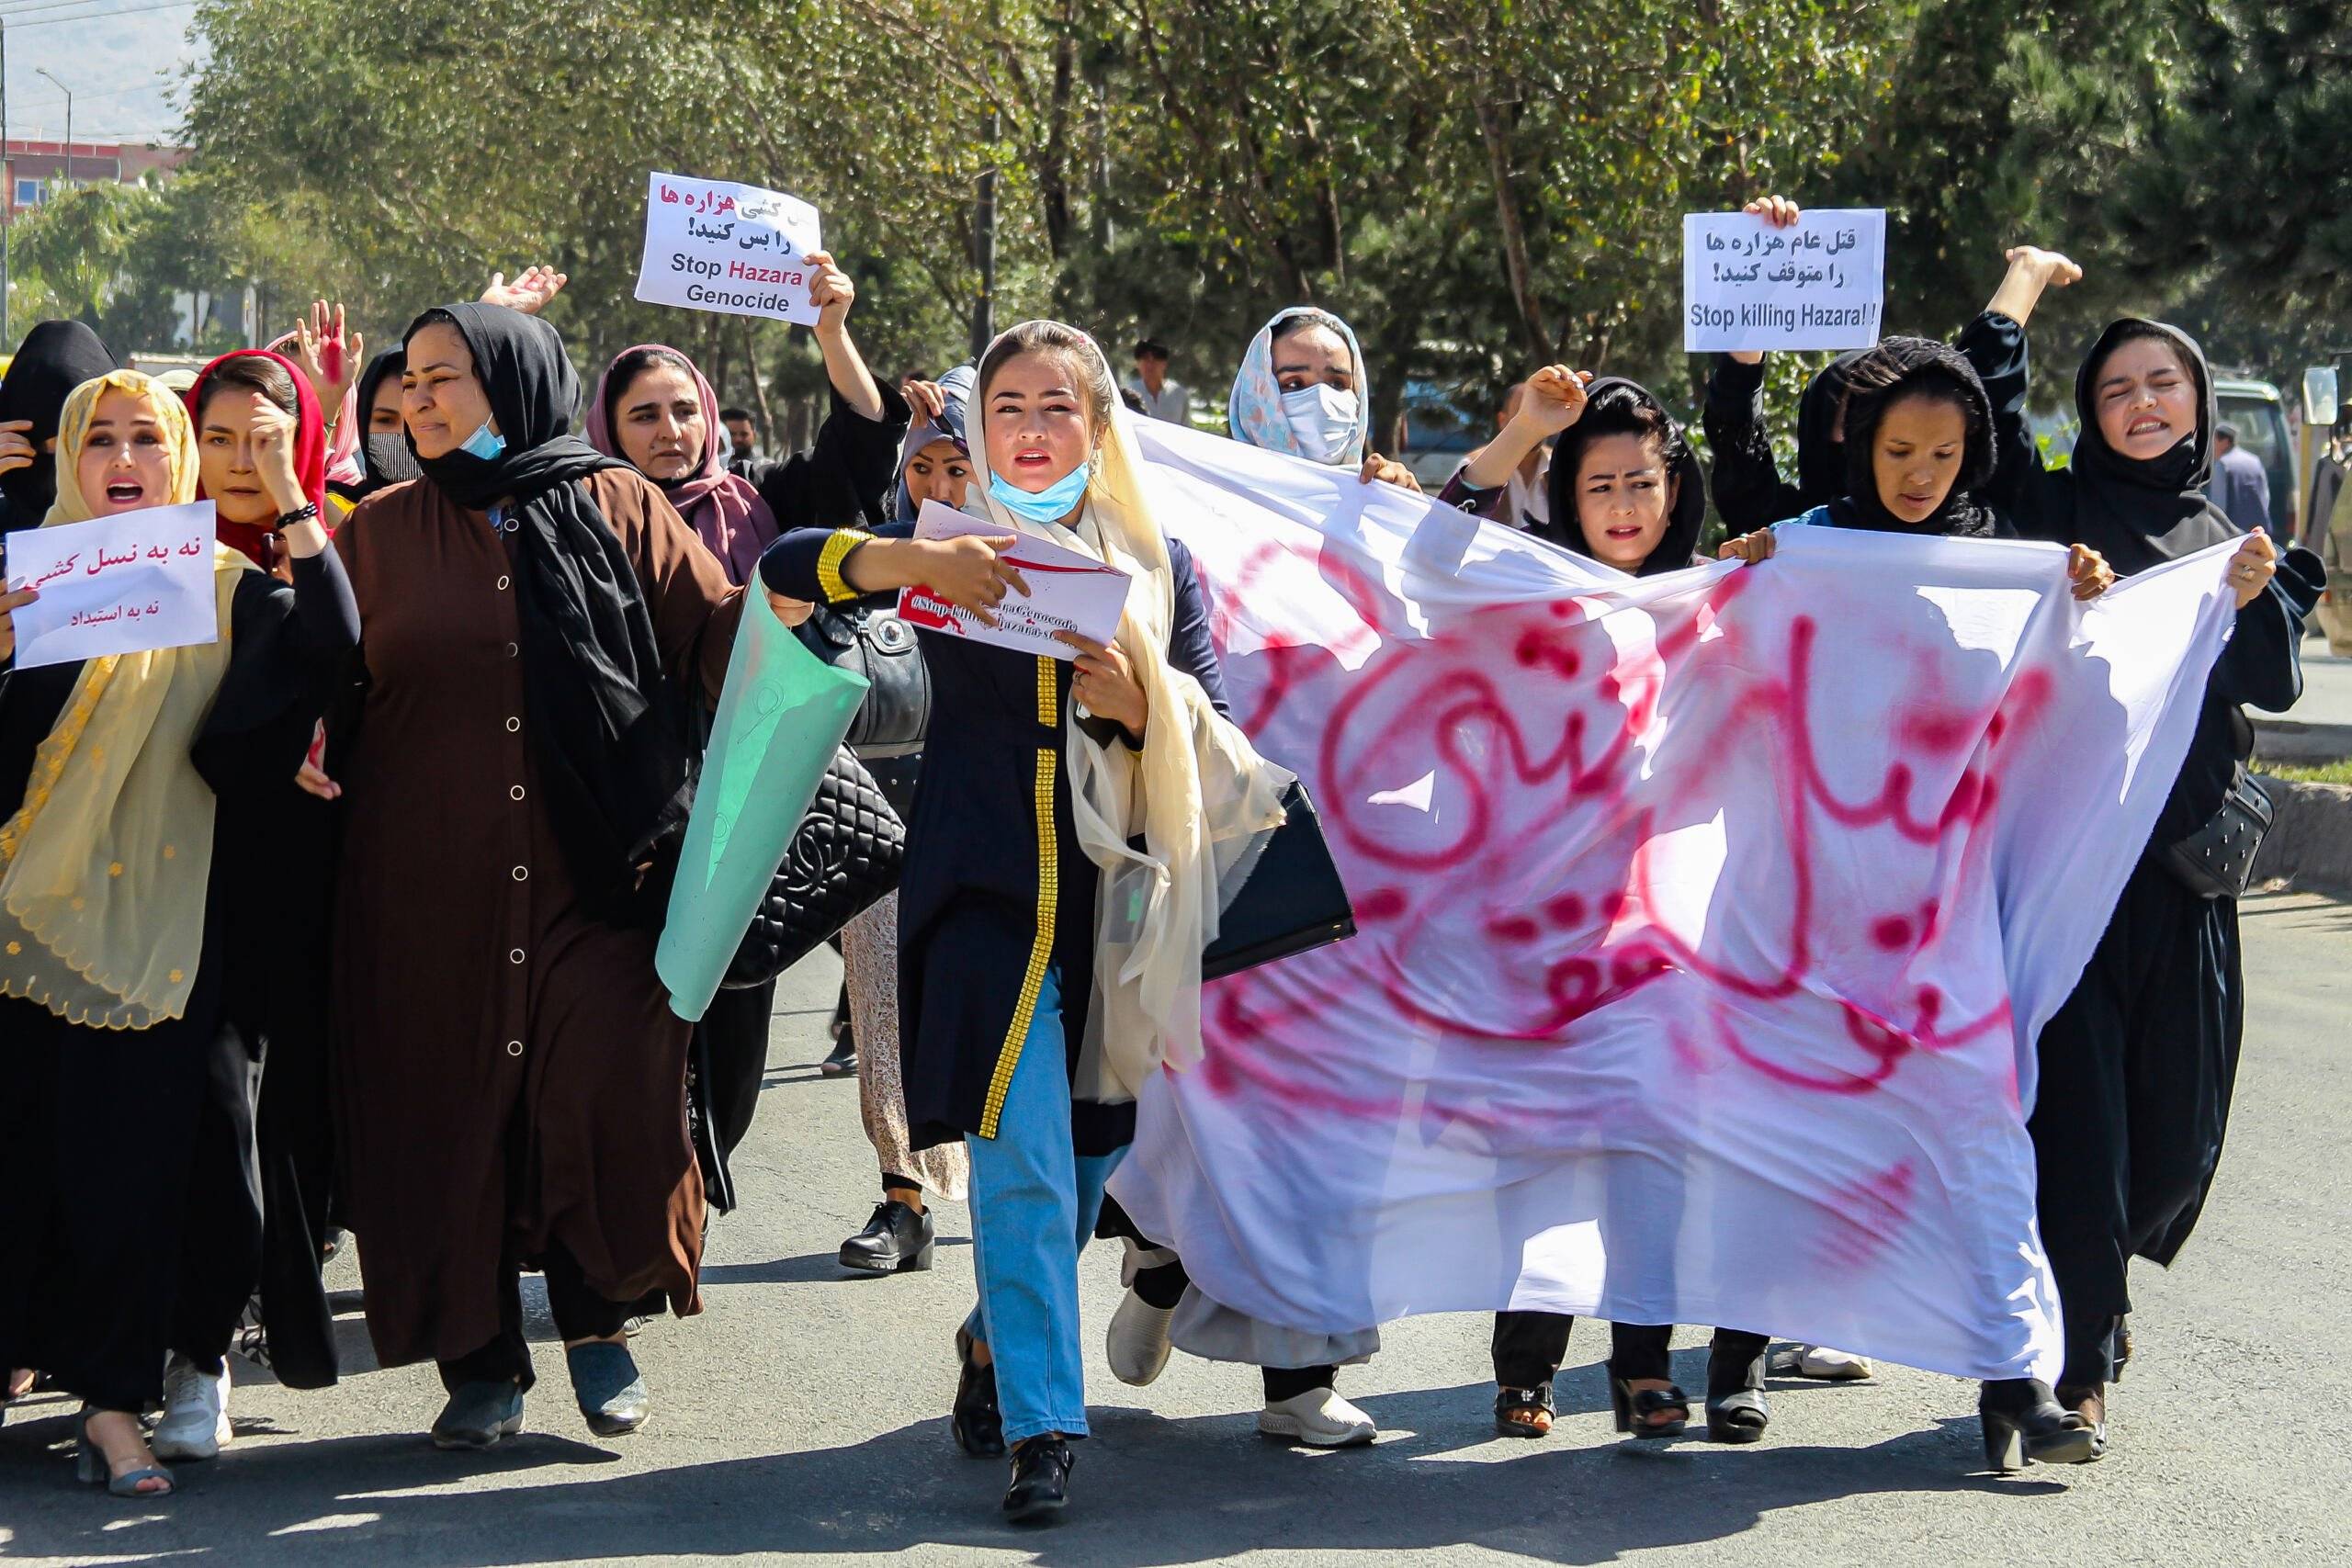 Afghan women display placards and chant slogans during a protest they call Stop Hazara genocide a day after a suicide bomb attack at Dasht-e-Barchi learning centre, in Kabul on October 1, 2022. - Dozens of women from Afghanistan's minority Hazara community protested in the capital October 1, after a suicide bombing a day earlier killed 20 people. (Photo by - / AFP)